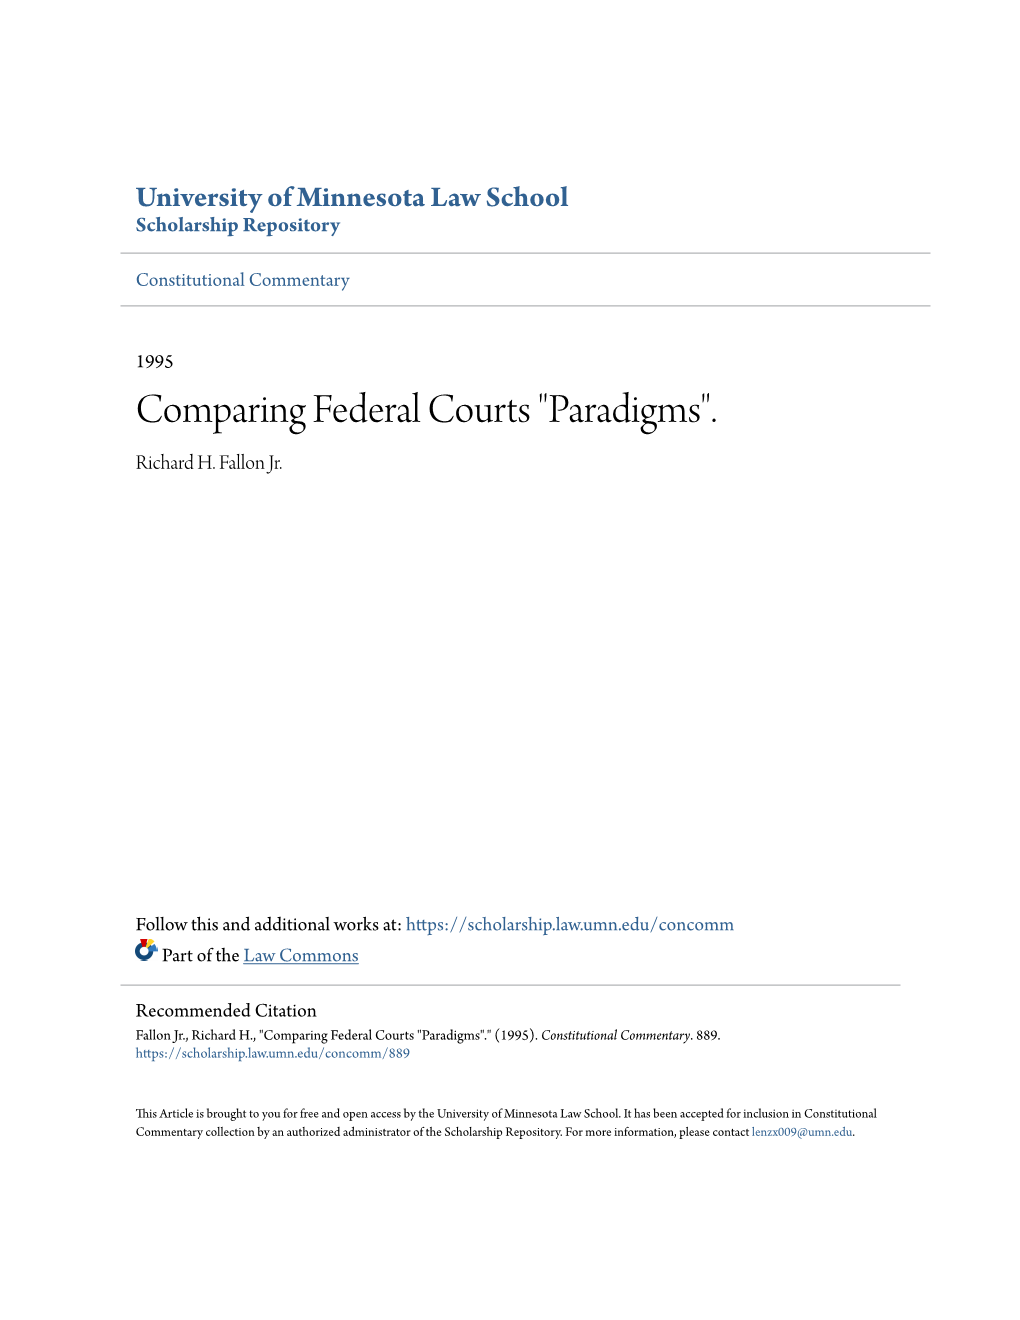 Comparing Federal Courts "Paradigms". Richard H